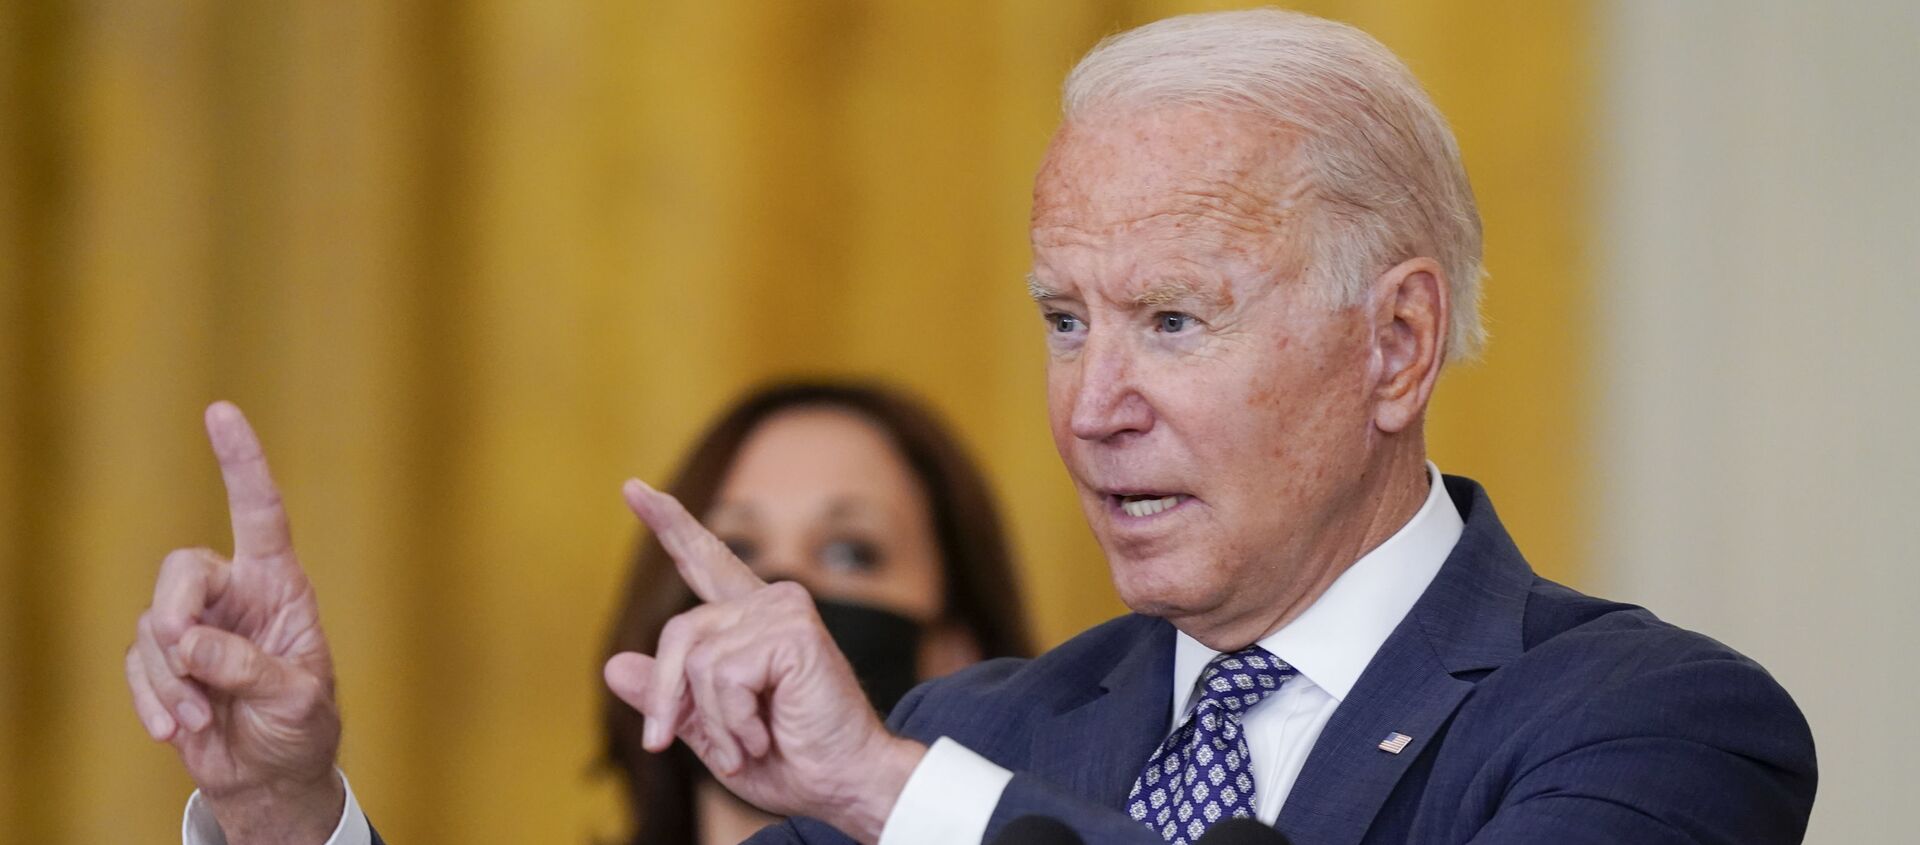 President Joe Biden answers questions from members of the media as he speaks about the evacuation of American citizens, their families, SIV applicants and vulnerable Afghans in the East Room of the White House, Friday, 20 August 2021, in Washington.  - Sputnik International, 1920, 21.08.2021